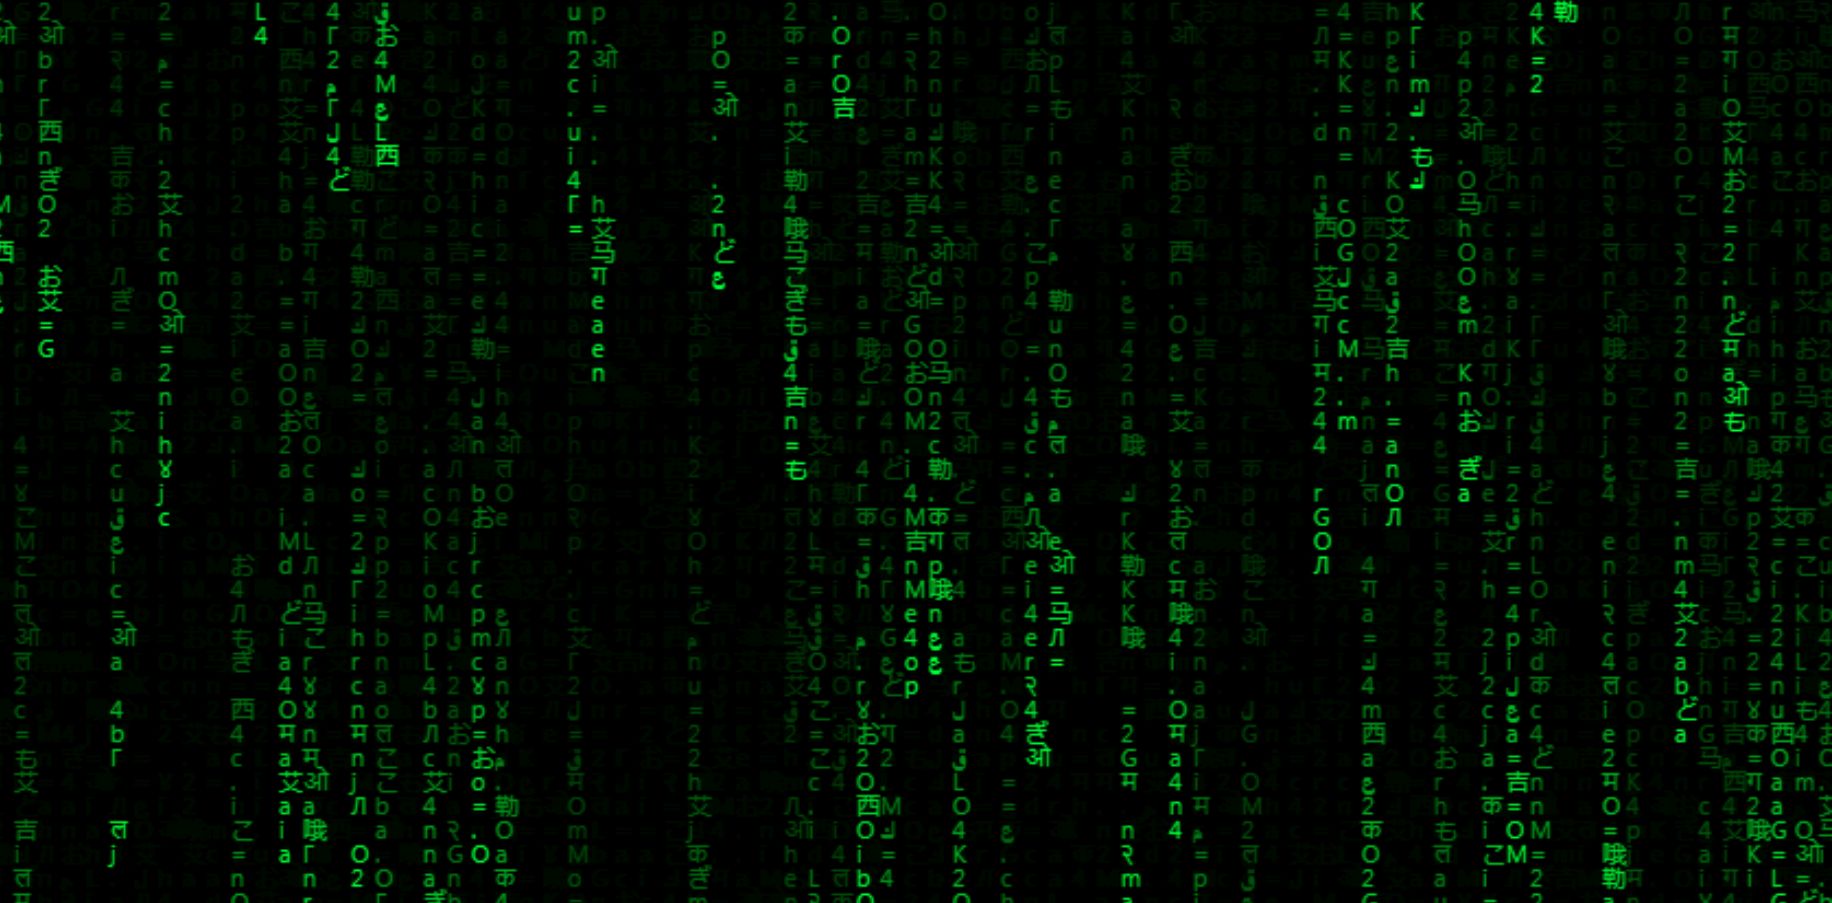 visual effect from the movie The Matrix, falling hieroglyphs